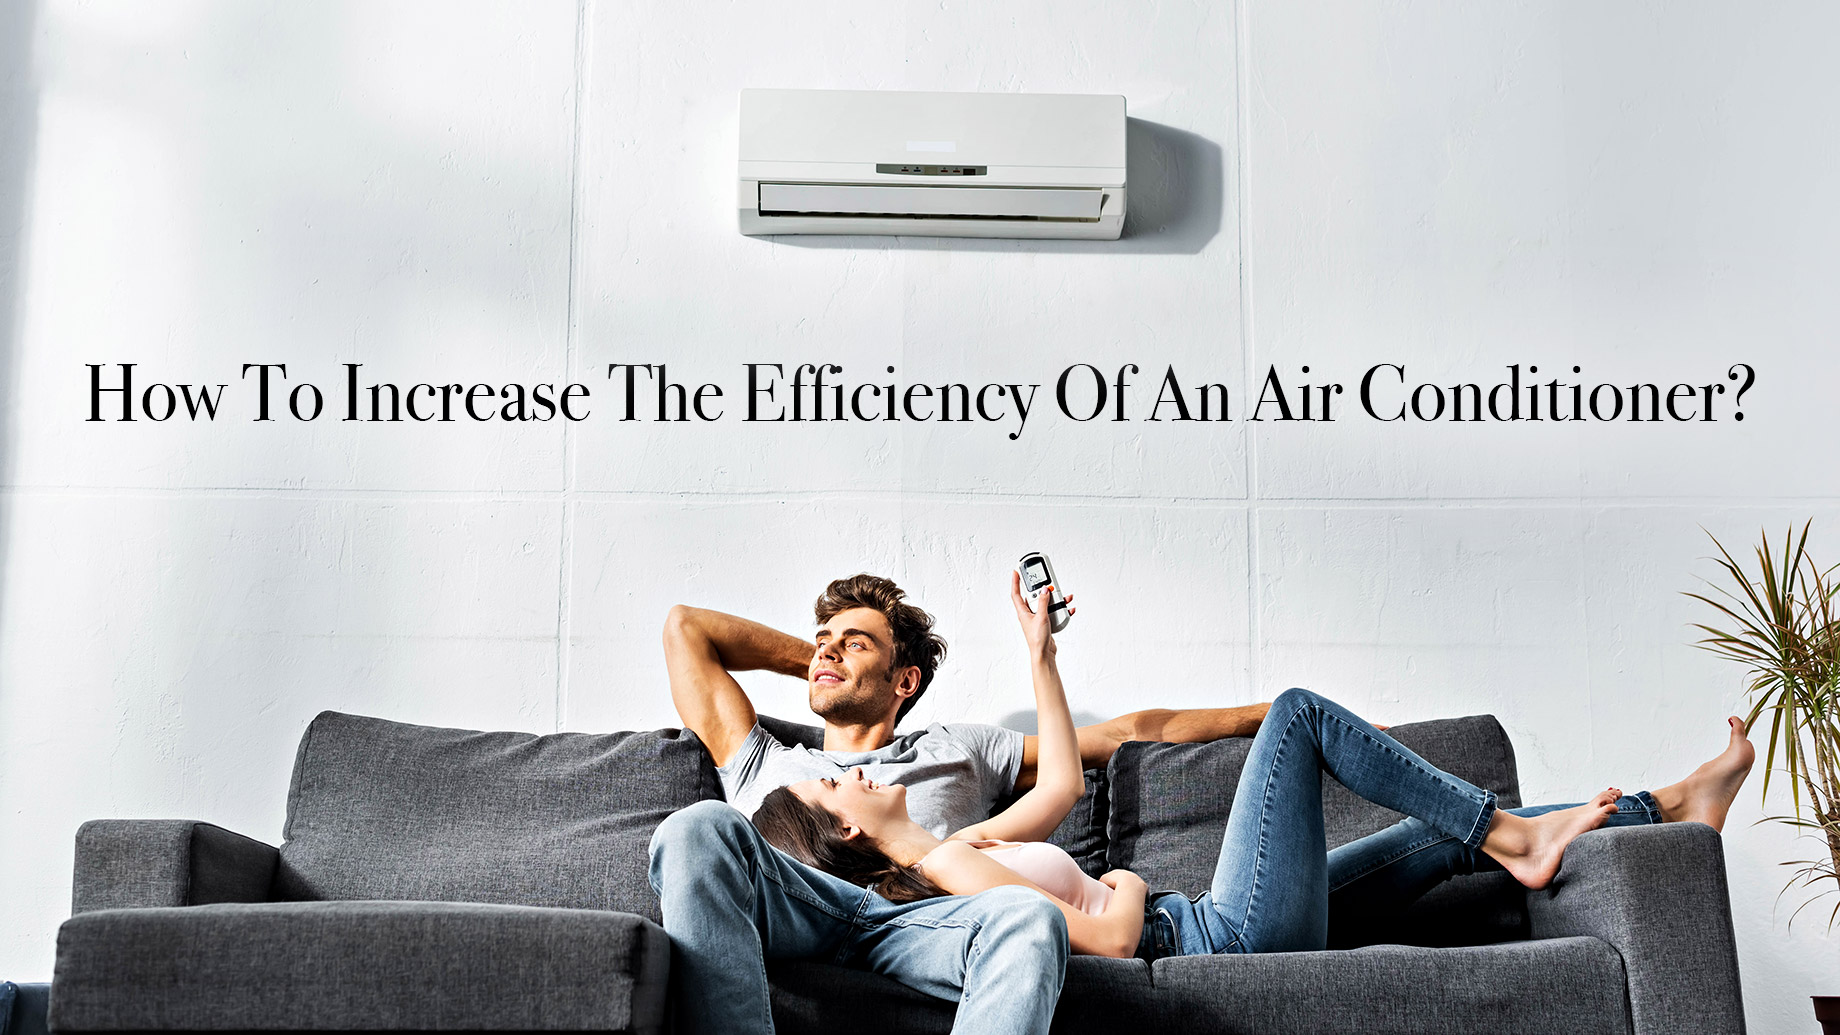 How To Increase The Efficiency Of An Air Conditioner? Here Are Some Valuable Tips